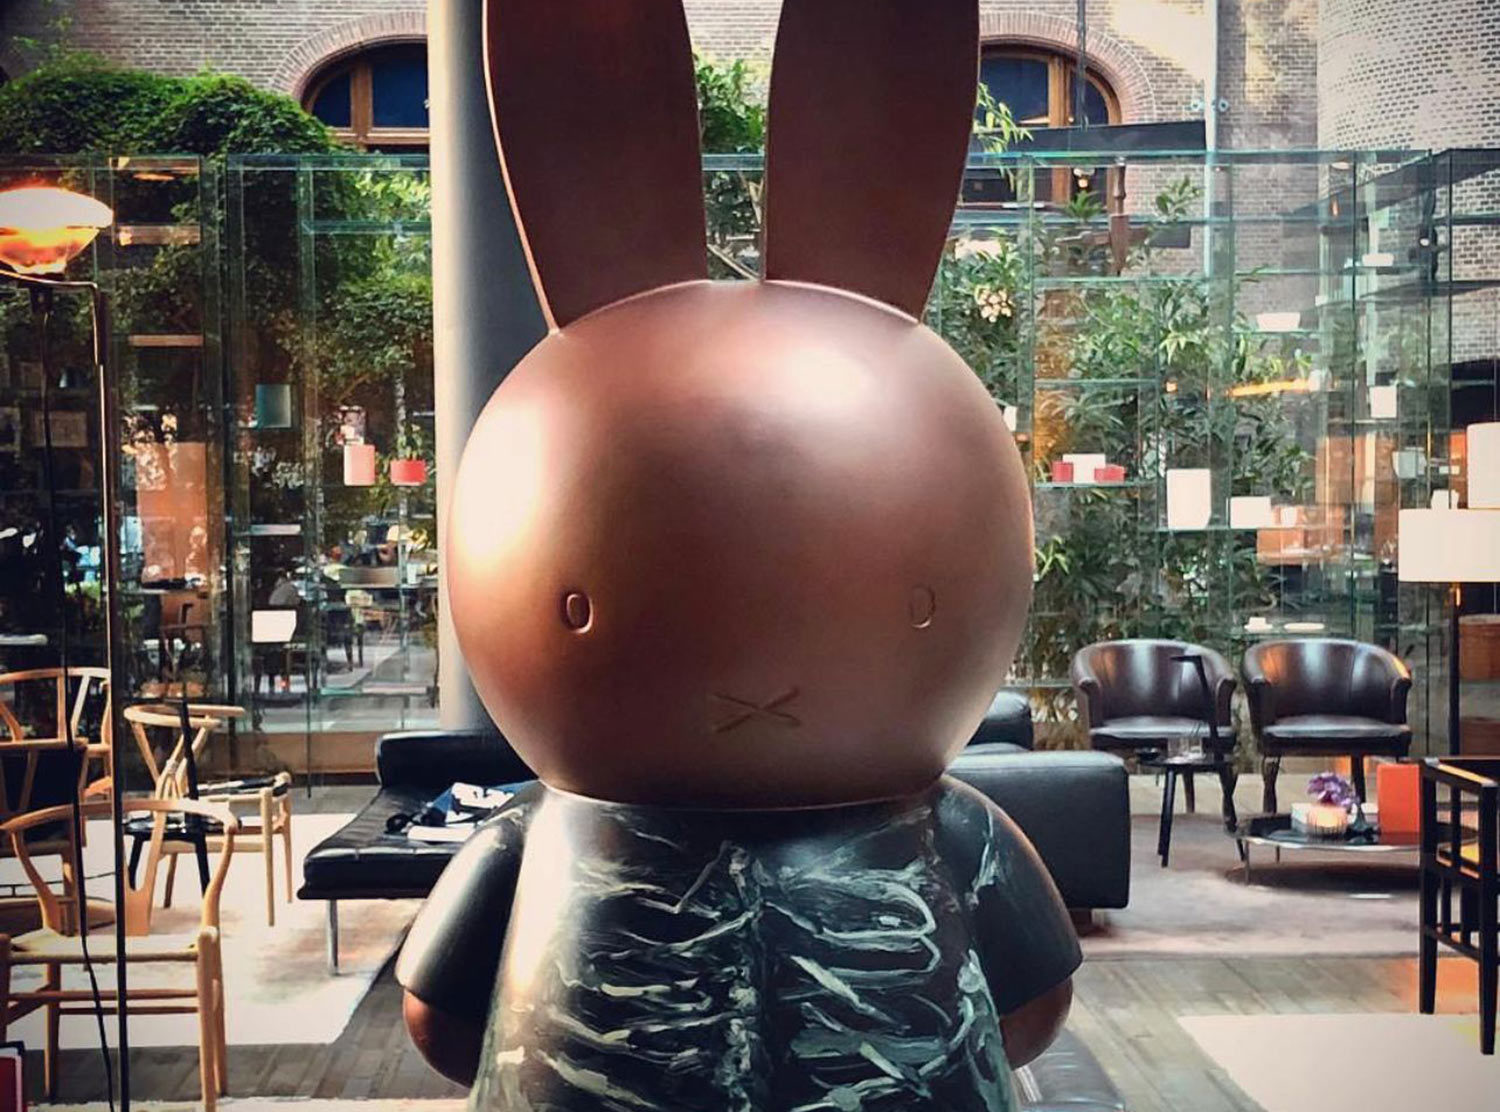 Conservatorium Hotel They even have one of the many bunny art pieces in the lobby <3